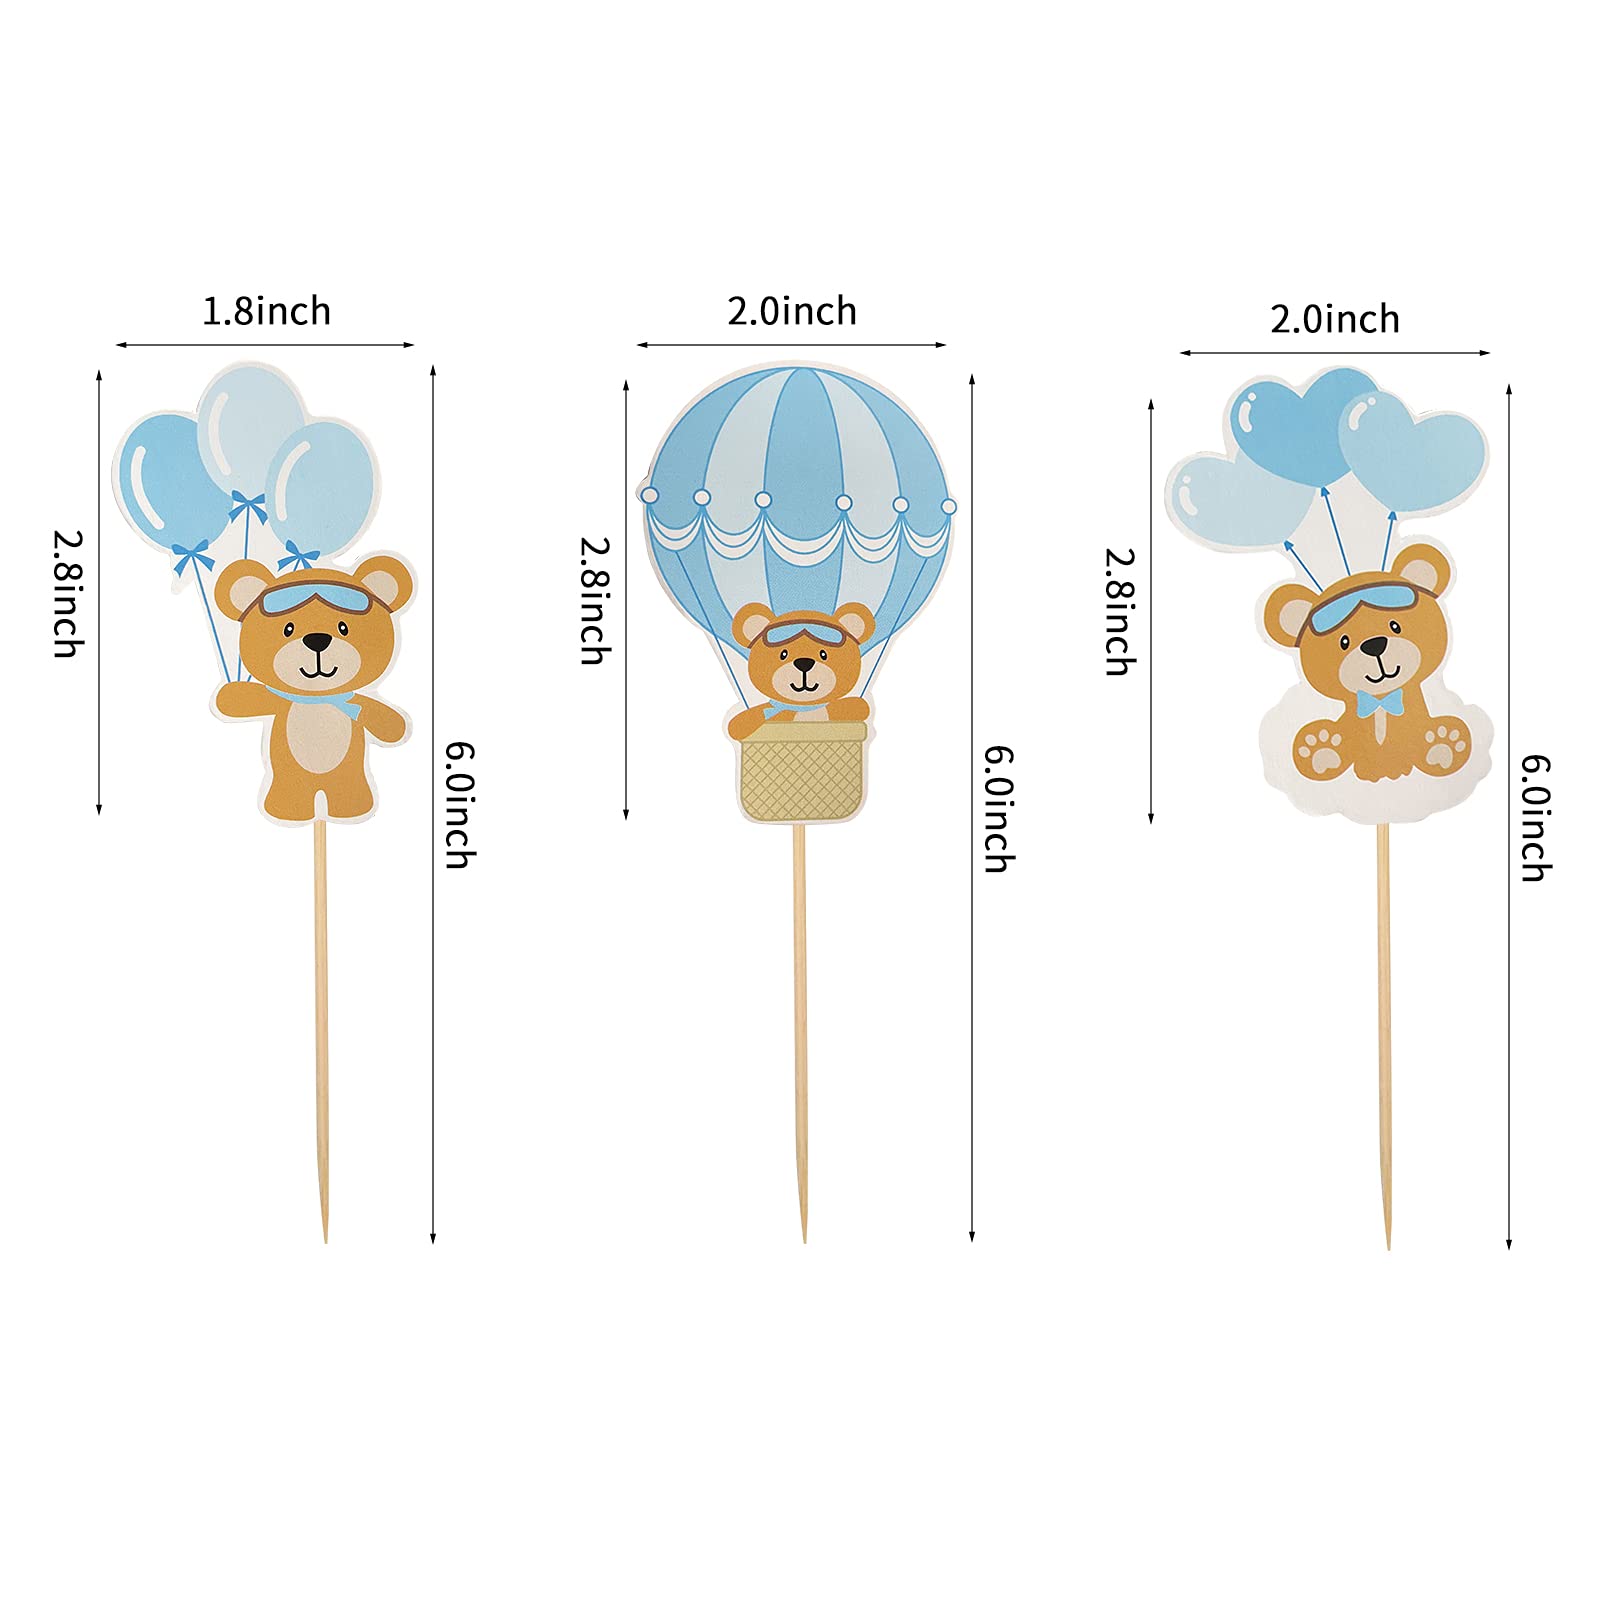 Hot Air Balloon Pilot Bear Cupcake Cake Toppers Aviator Fly Baby Shower Birthday Party Decorations Supplies (Hot Air Balloon Pilot Bea)